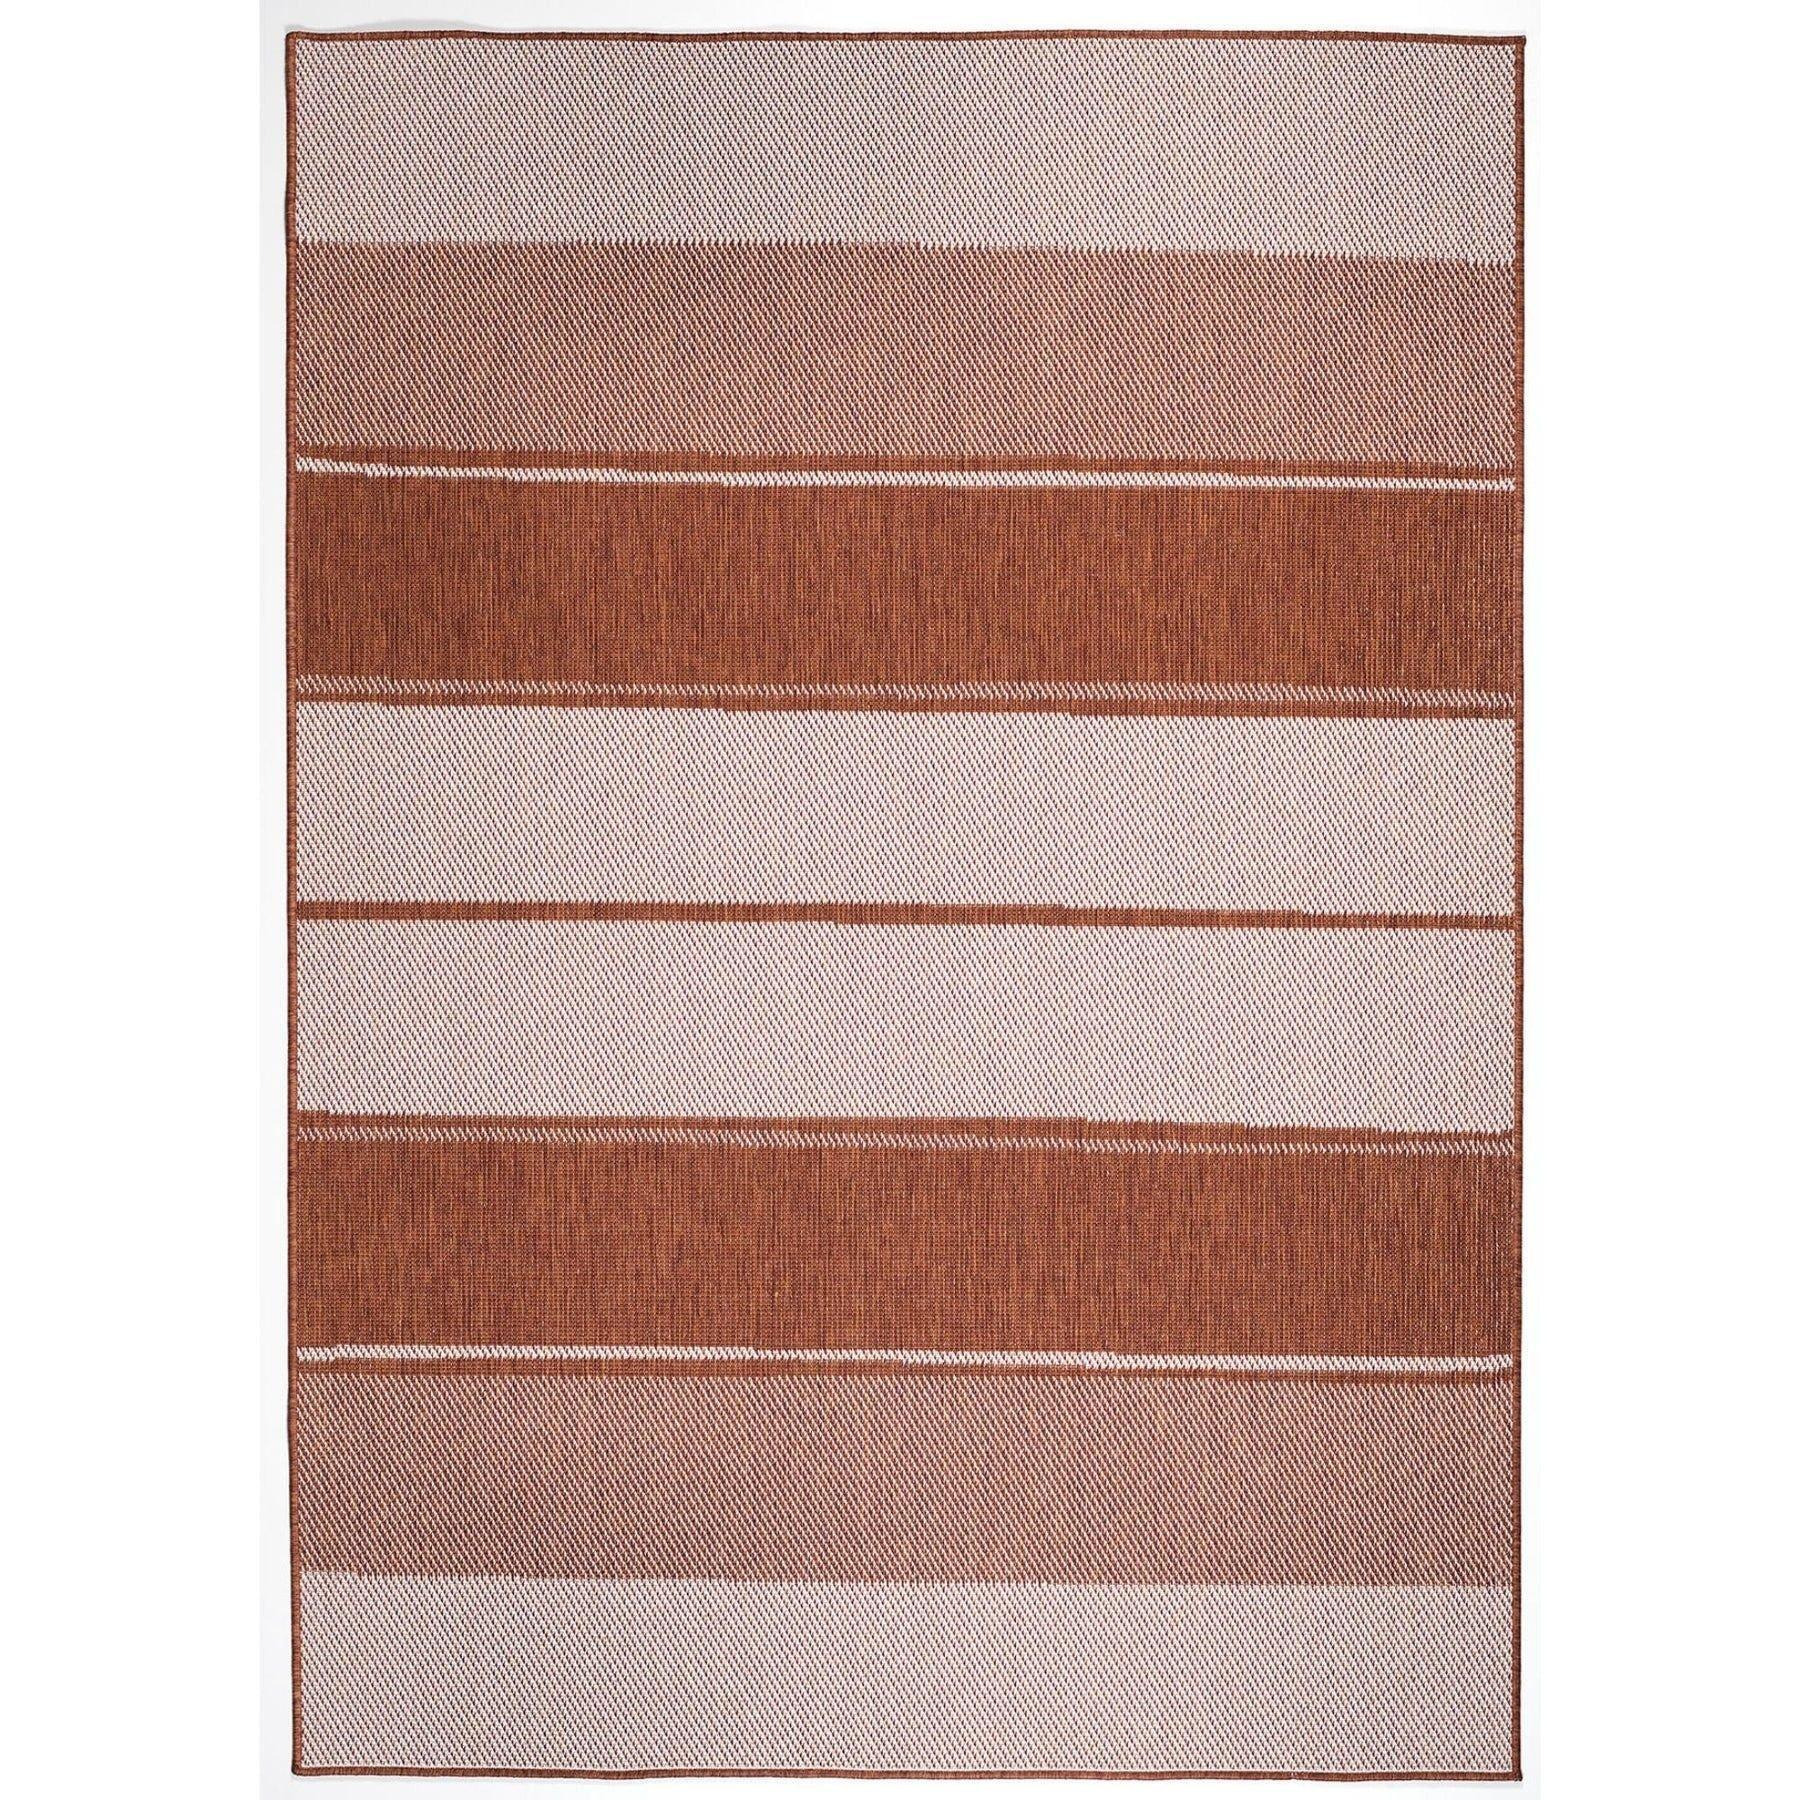 Duo Weave Collection Outdoor Rugs in Tonal Stripes Design - image 1